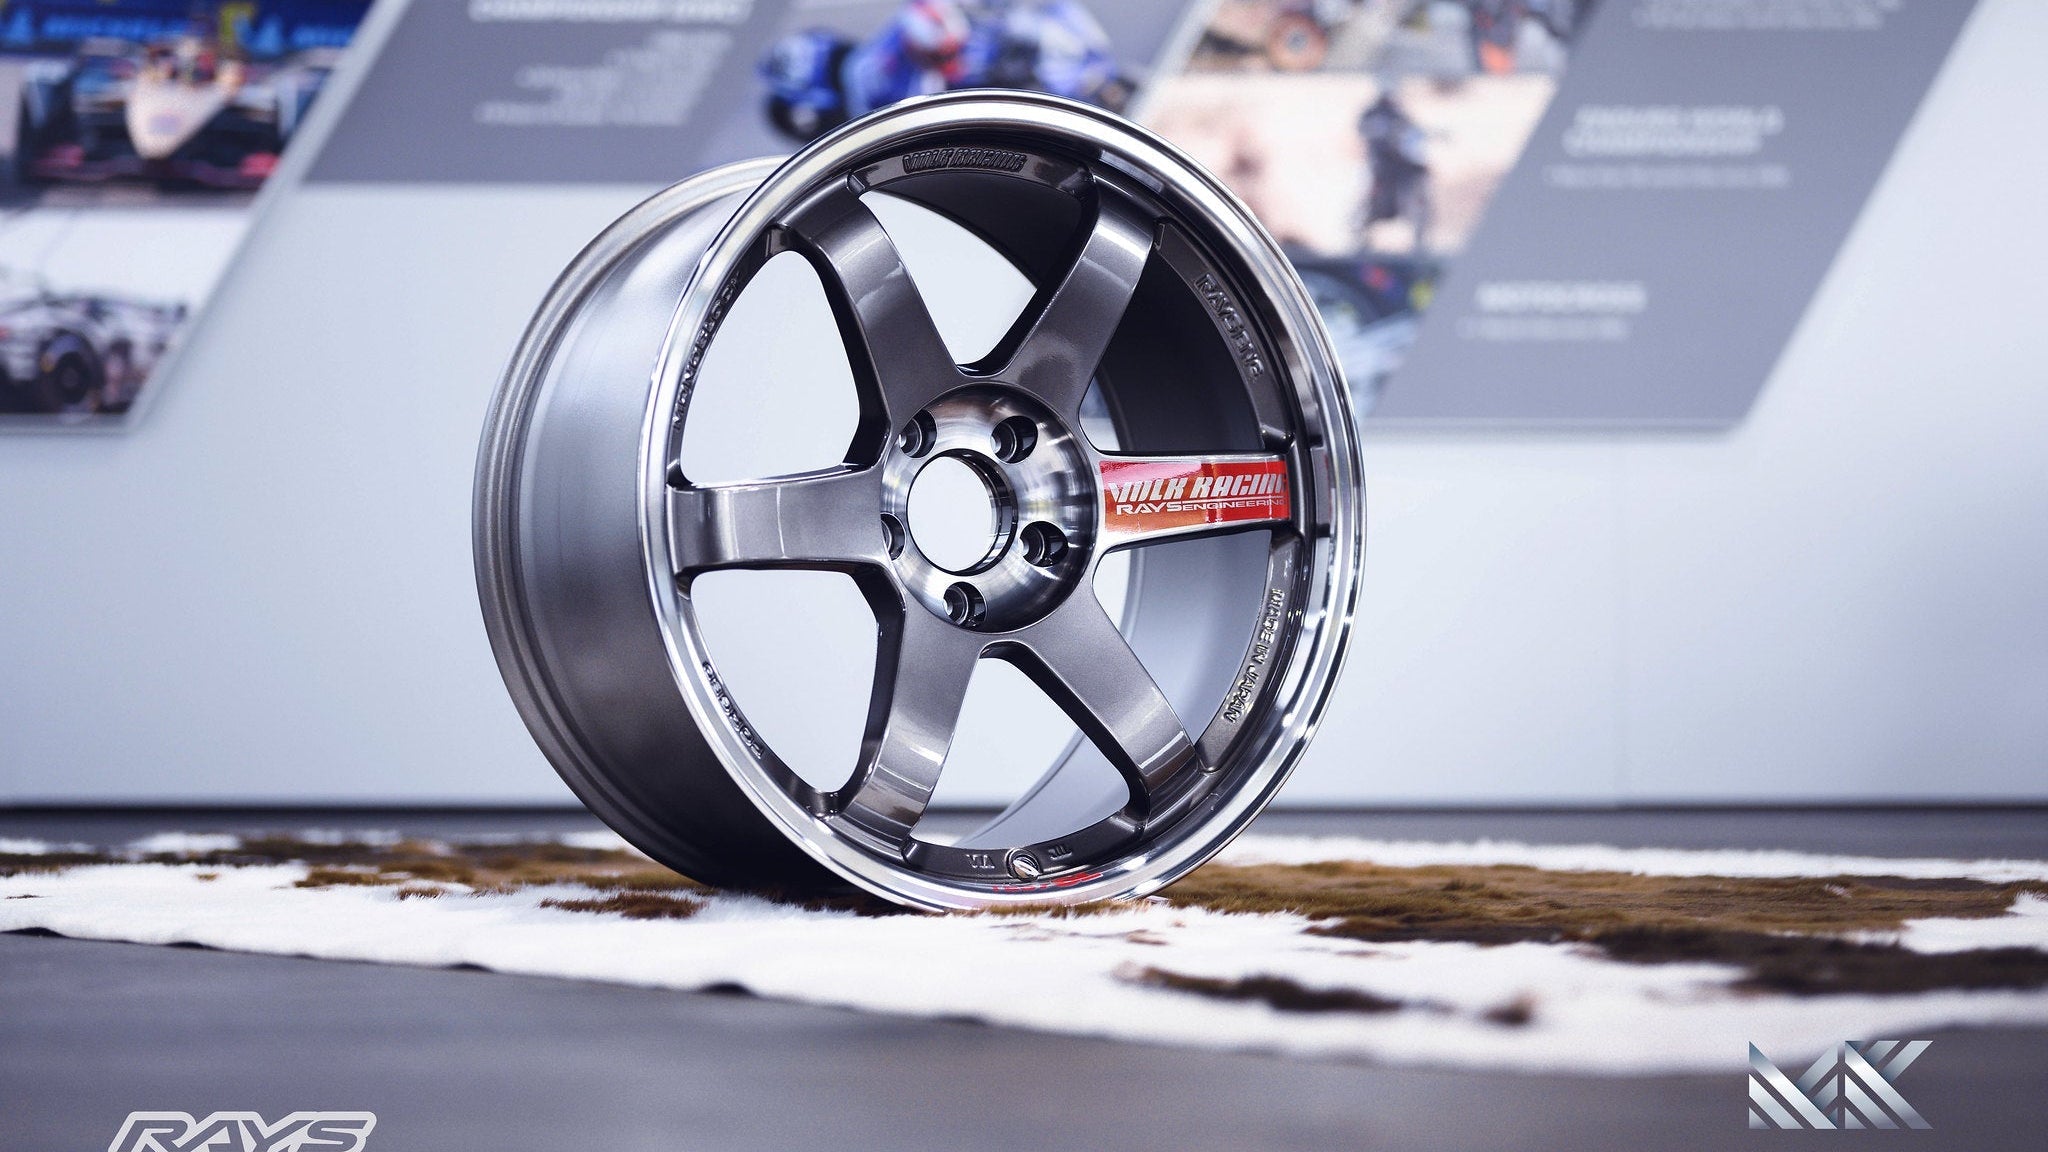 Volk Racing TE37SL 18" for R34 GT-R - Premium Wheels from Volk Racing - From just $4790.00! Shop now at MK MOTORSPORTS